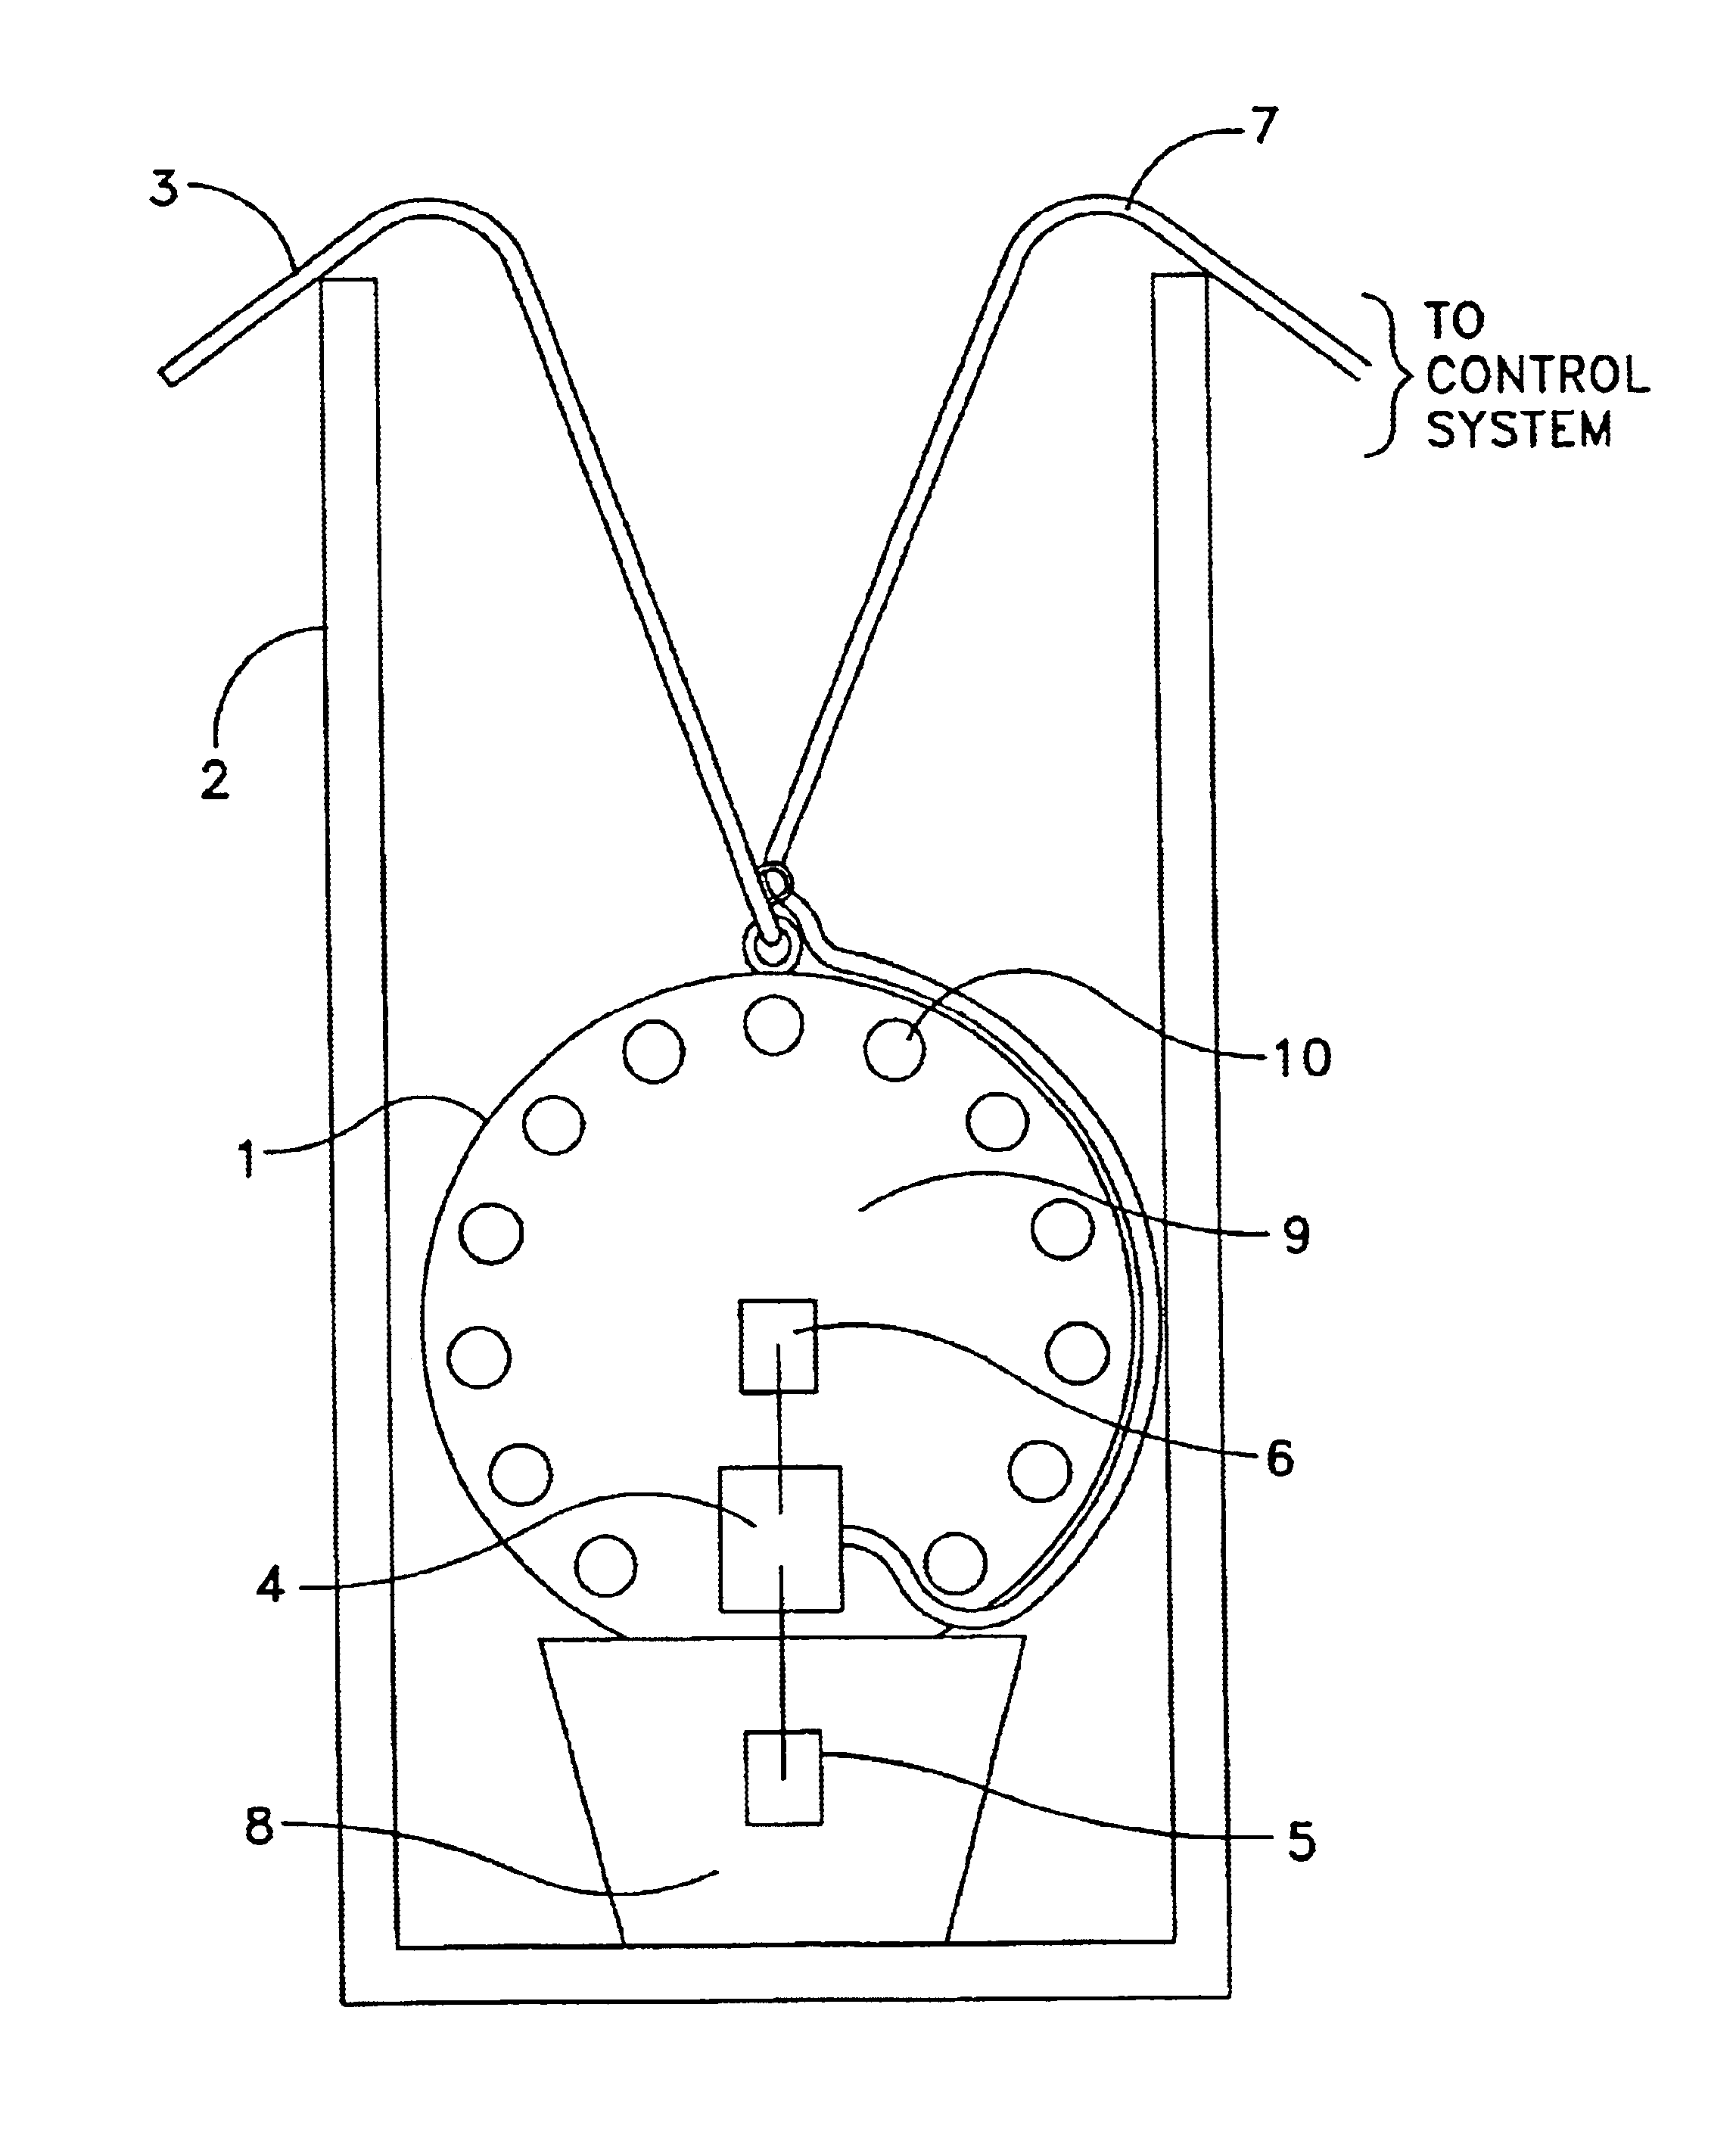 Precision pyrotechnic display system and method having increased safety and timing accuracy